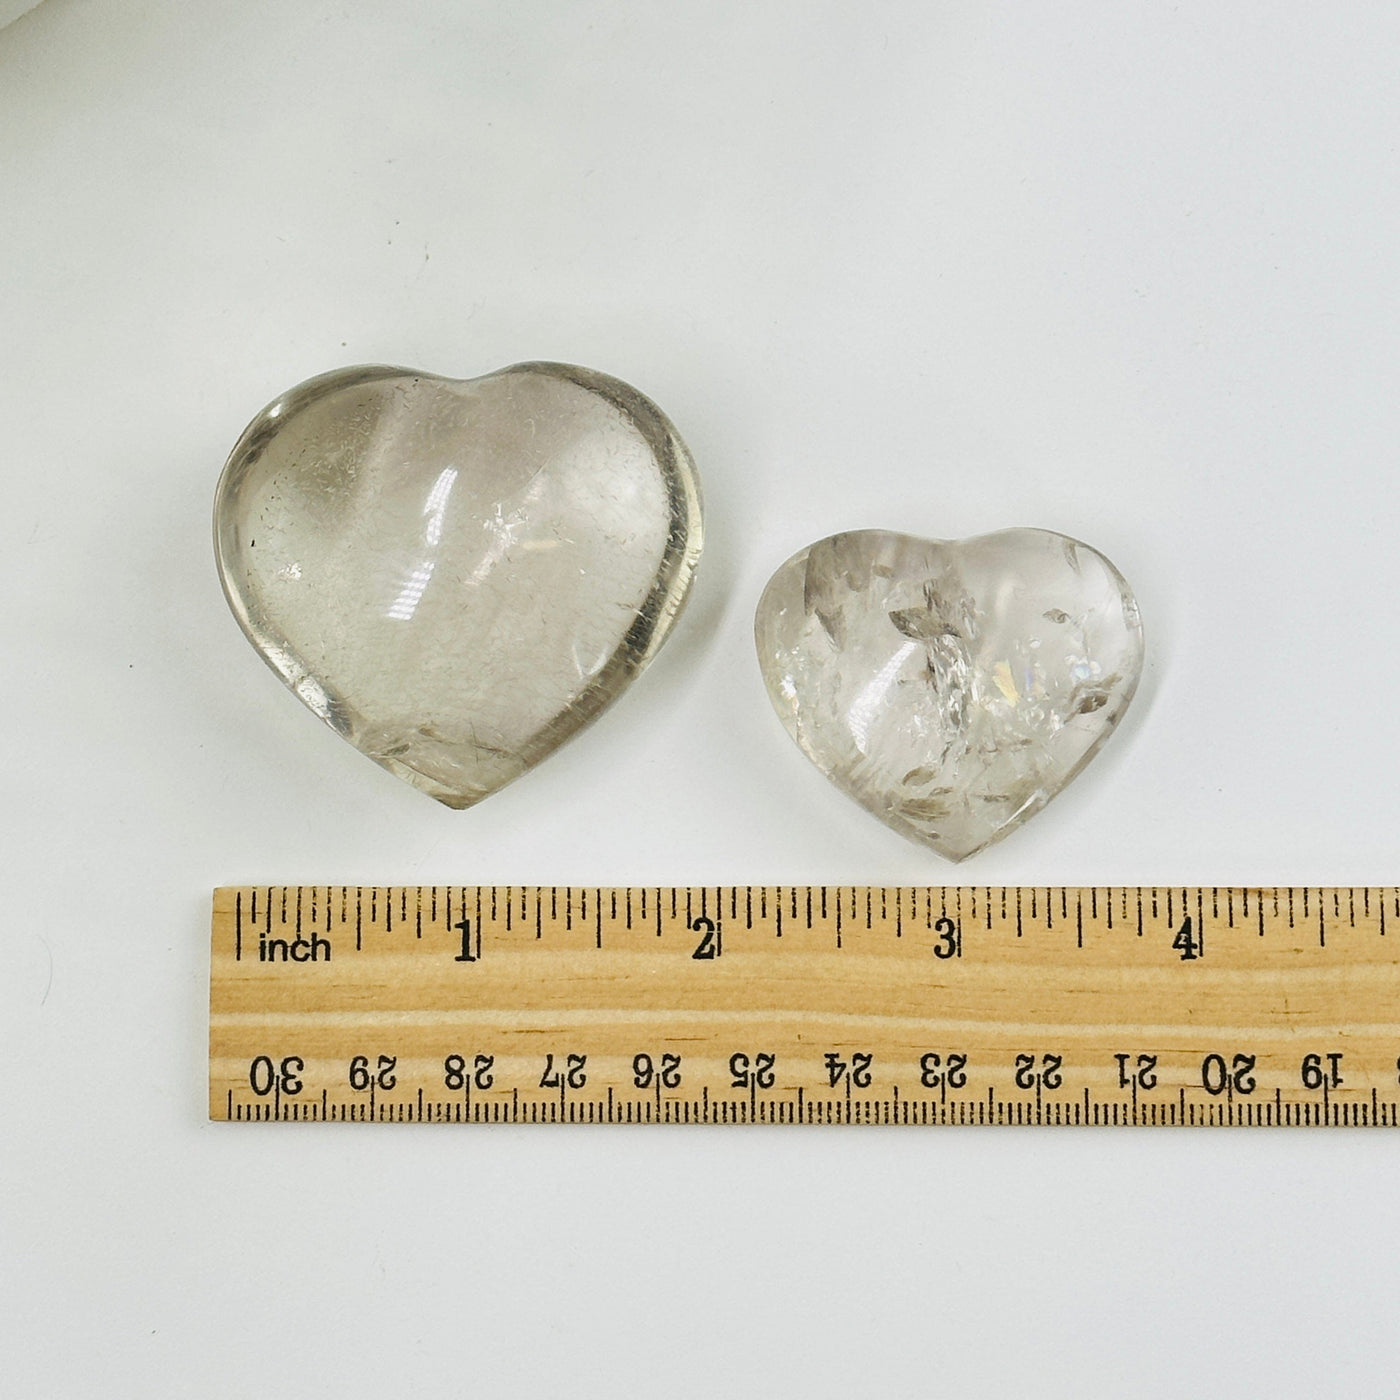 Crystal quartz hearts next to a ruler for size reference